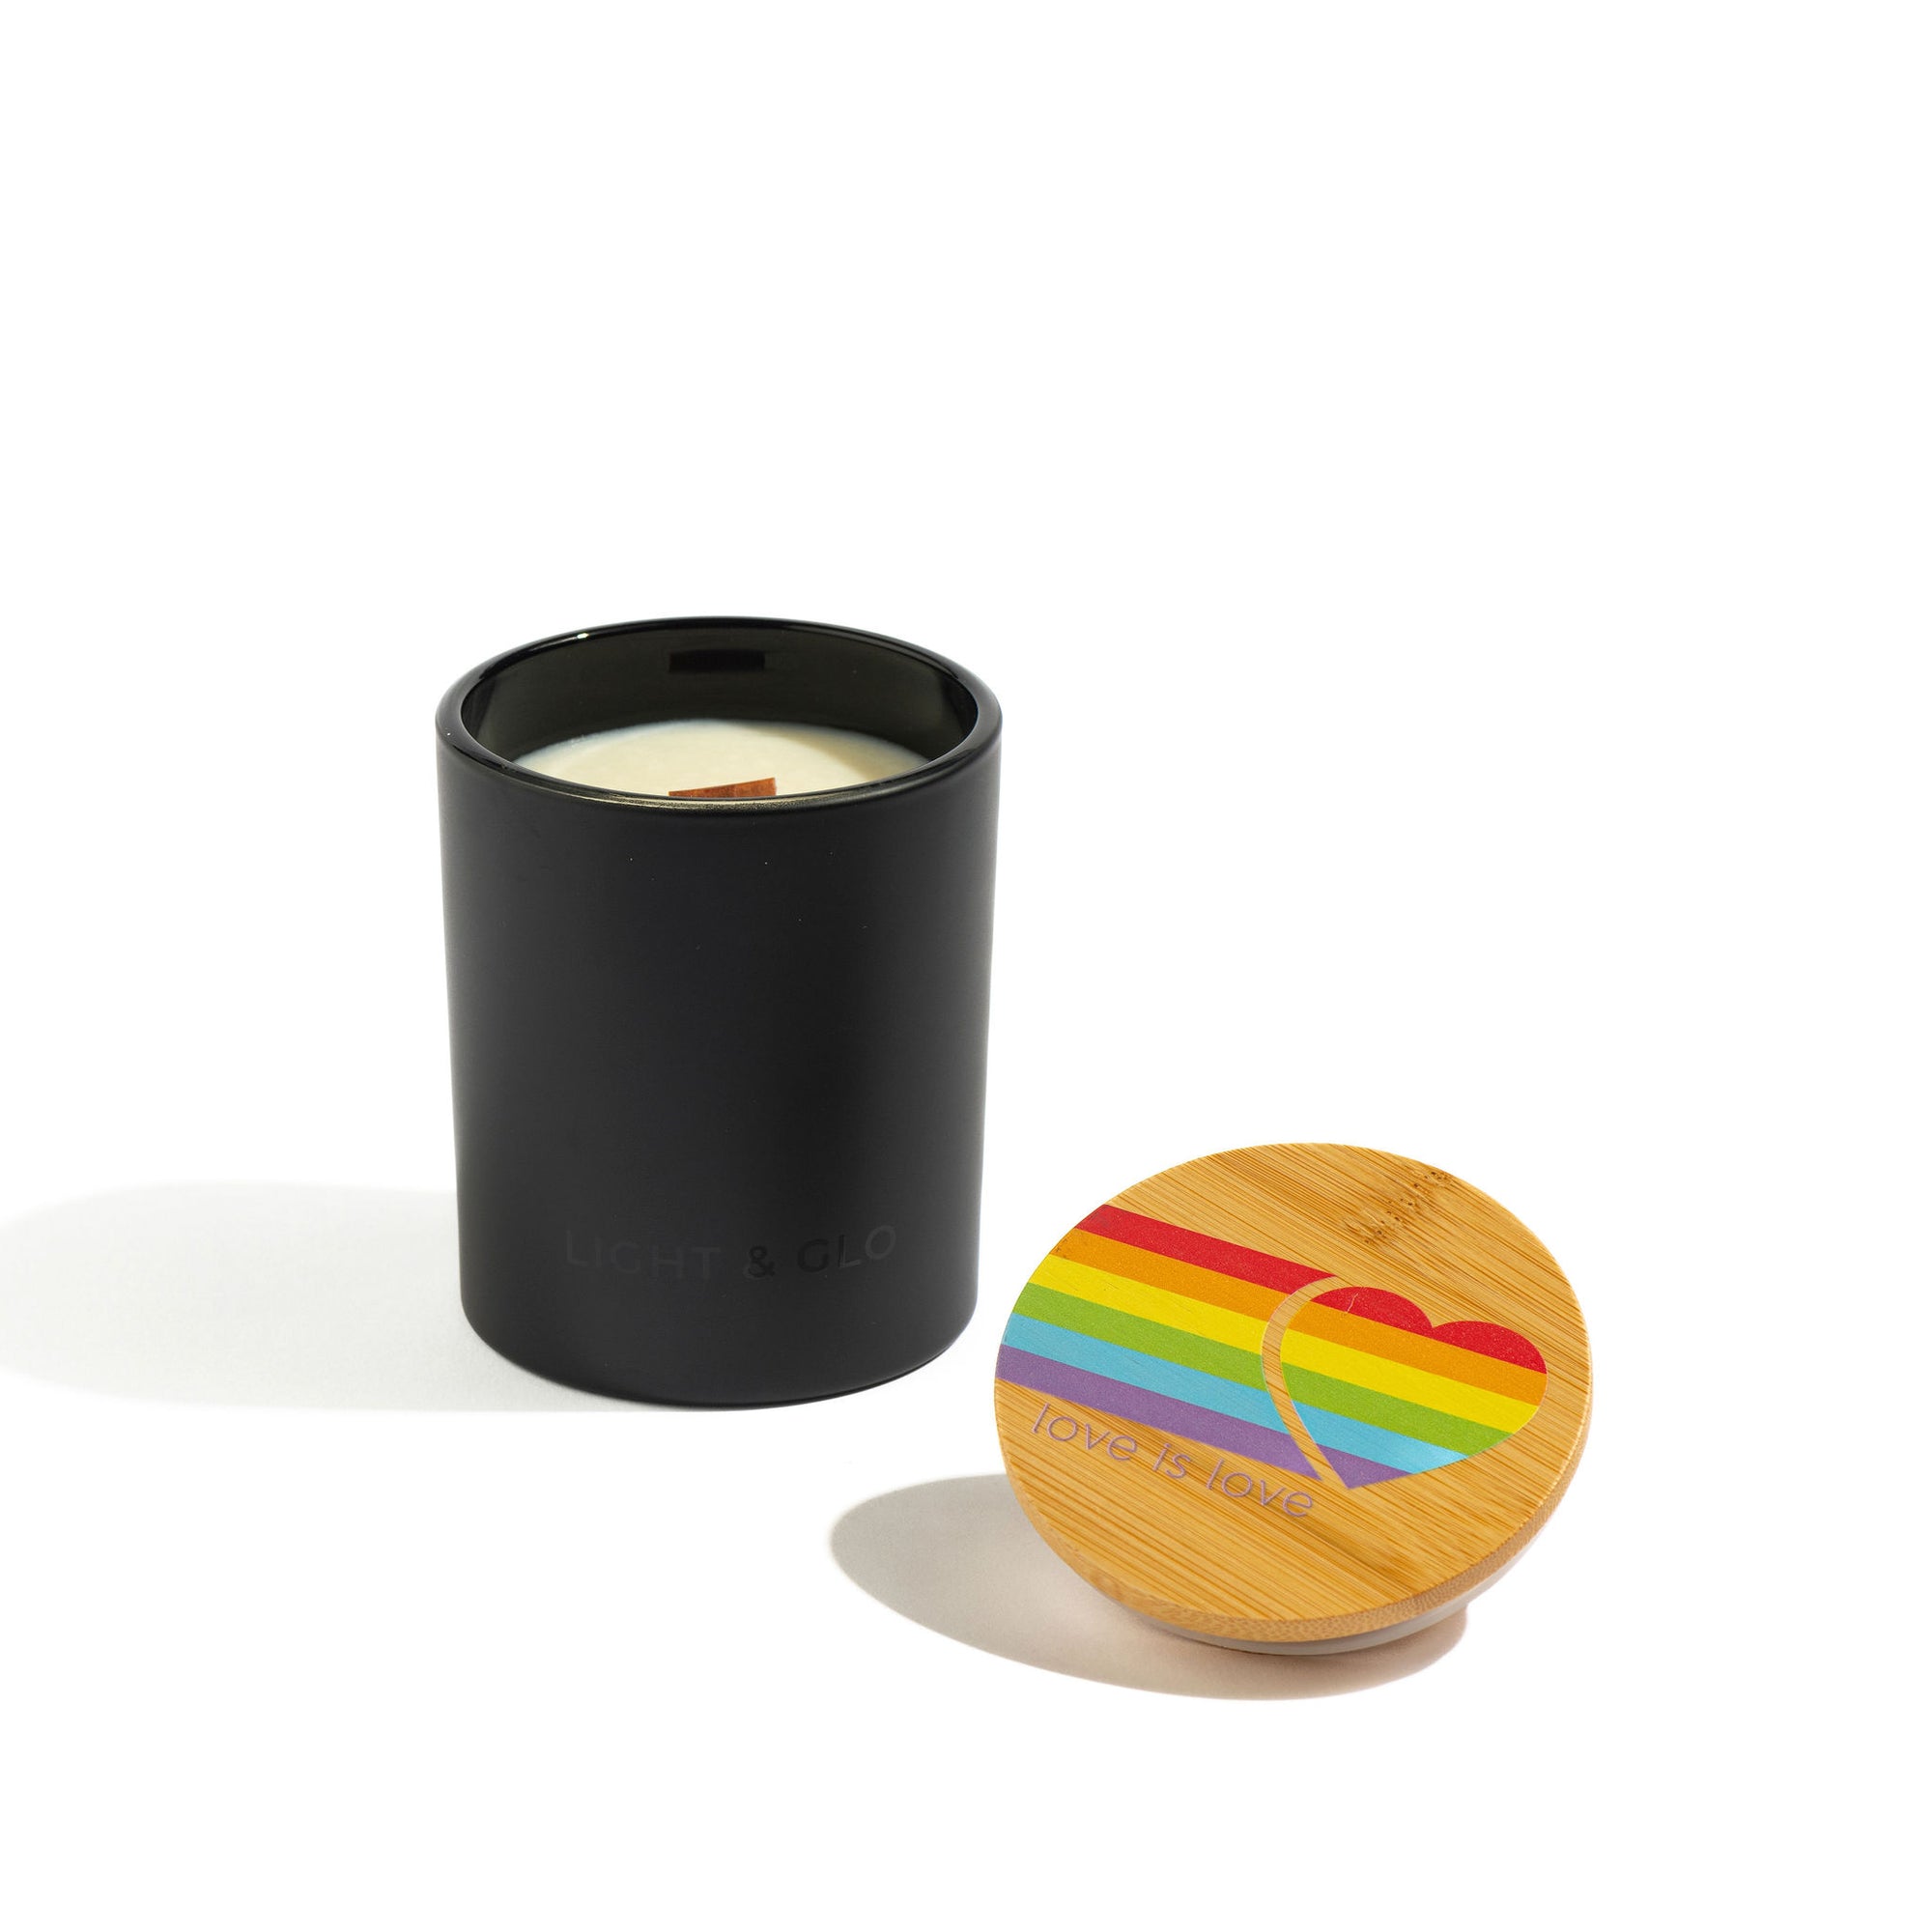 Pride Candle - Rainbow Spirit | Luxury Candles & Home Fragrances by Light + Glo